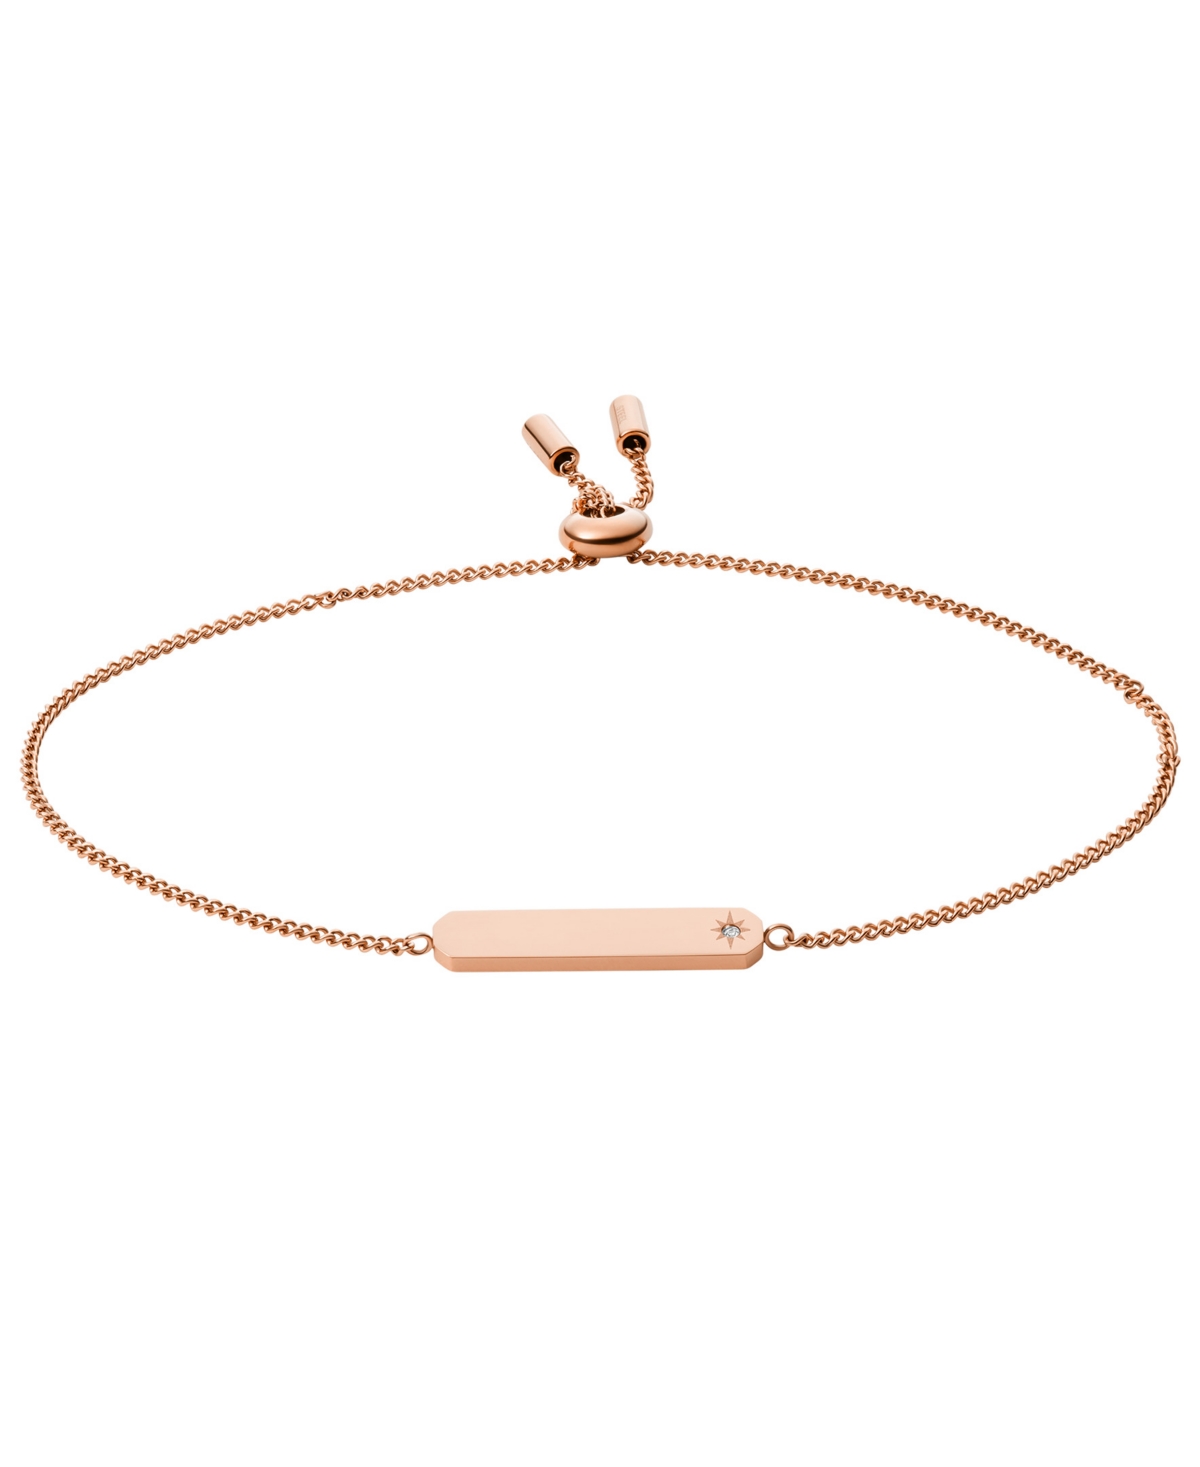 Shop Fossil Lane Stainless Steel Bar Chain Bracelet In Rose Gold-tone